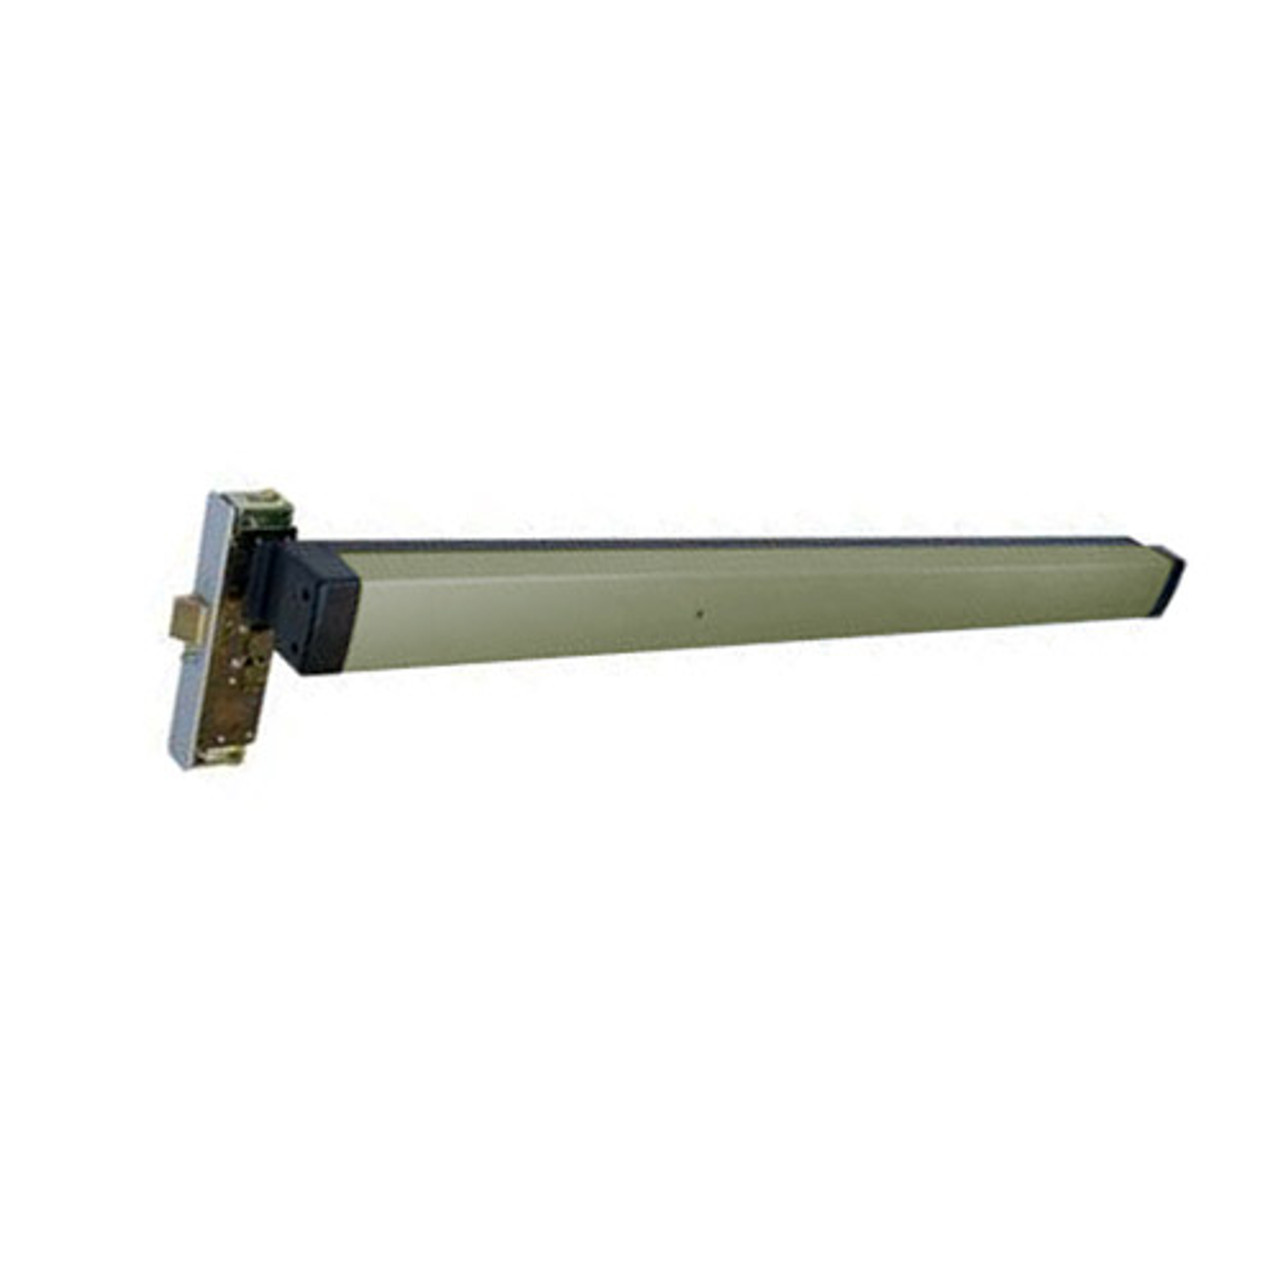 3310-83-36-628 Adams Rite Mortise Exit Device